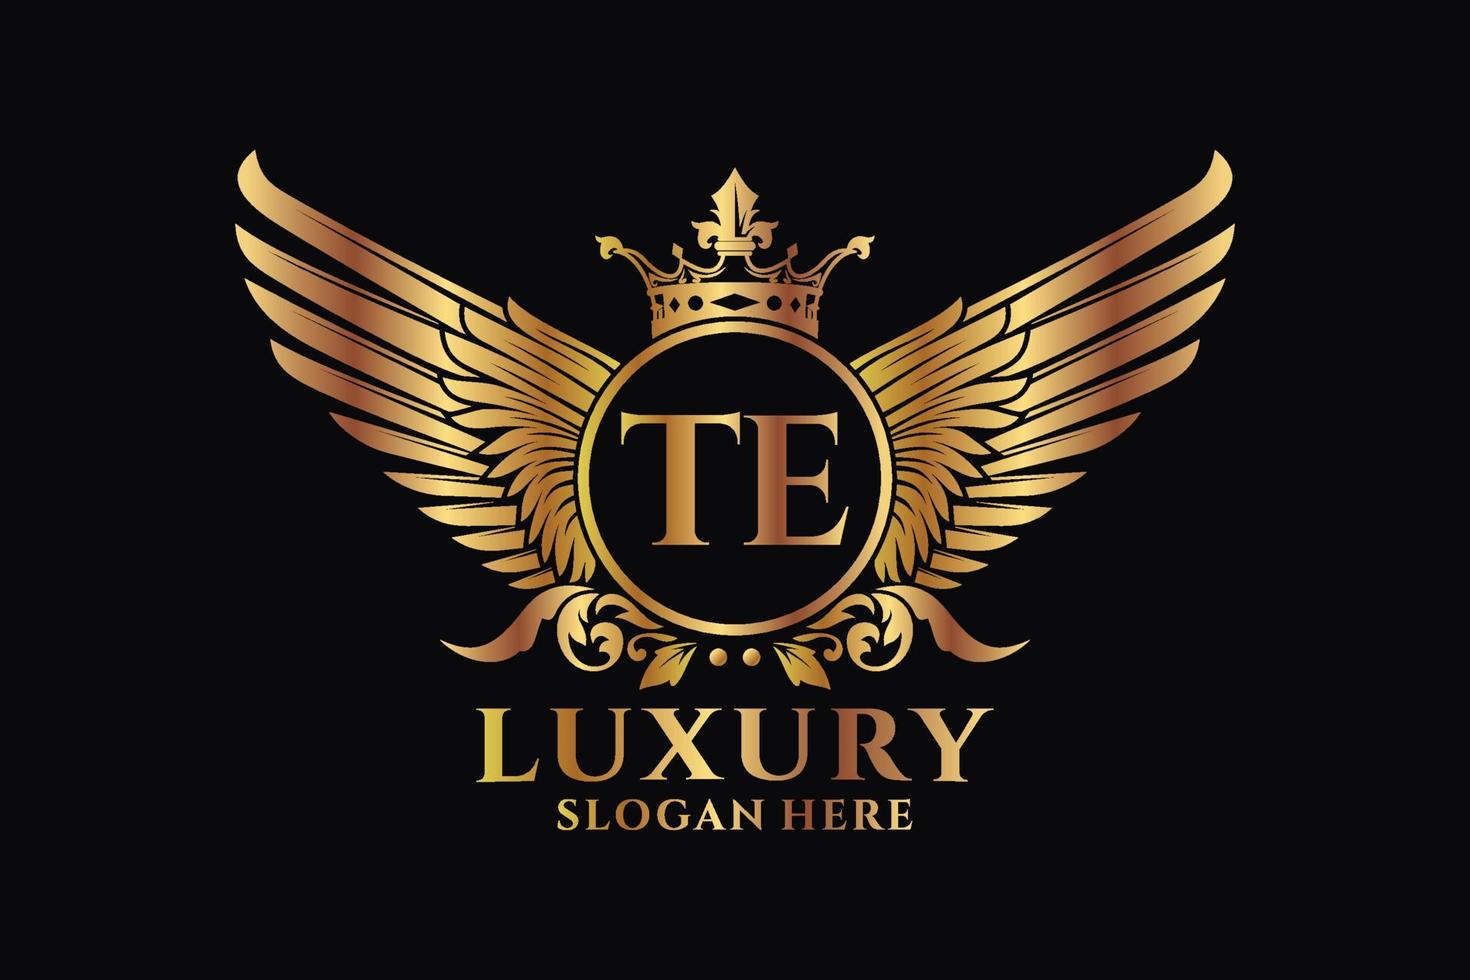 Luxury royal wing Letter TE crest Gold color Logo vector, Victory logo, crest logo, wing logo, vector logo template.